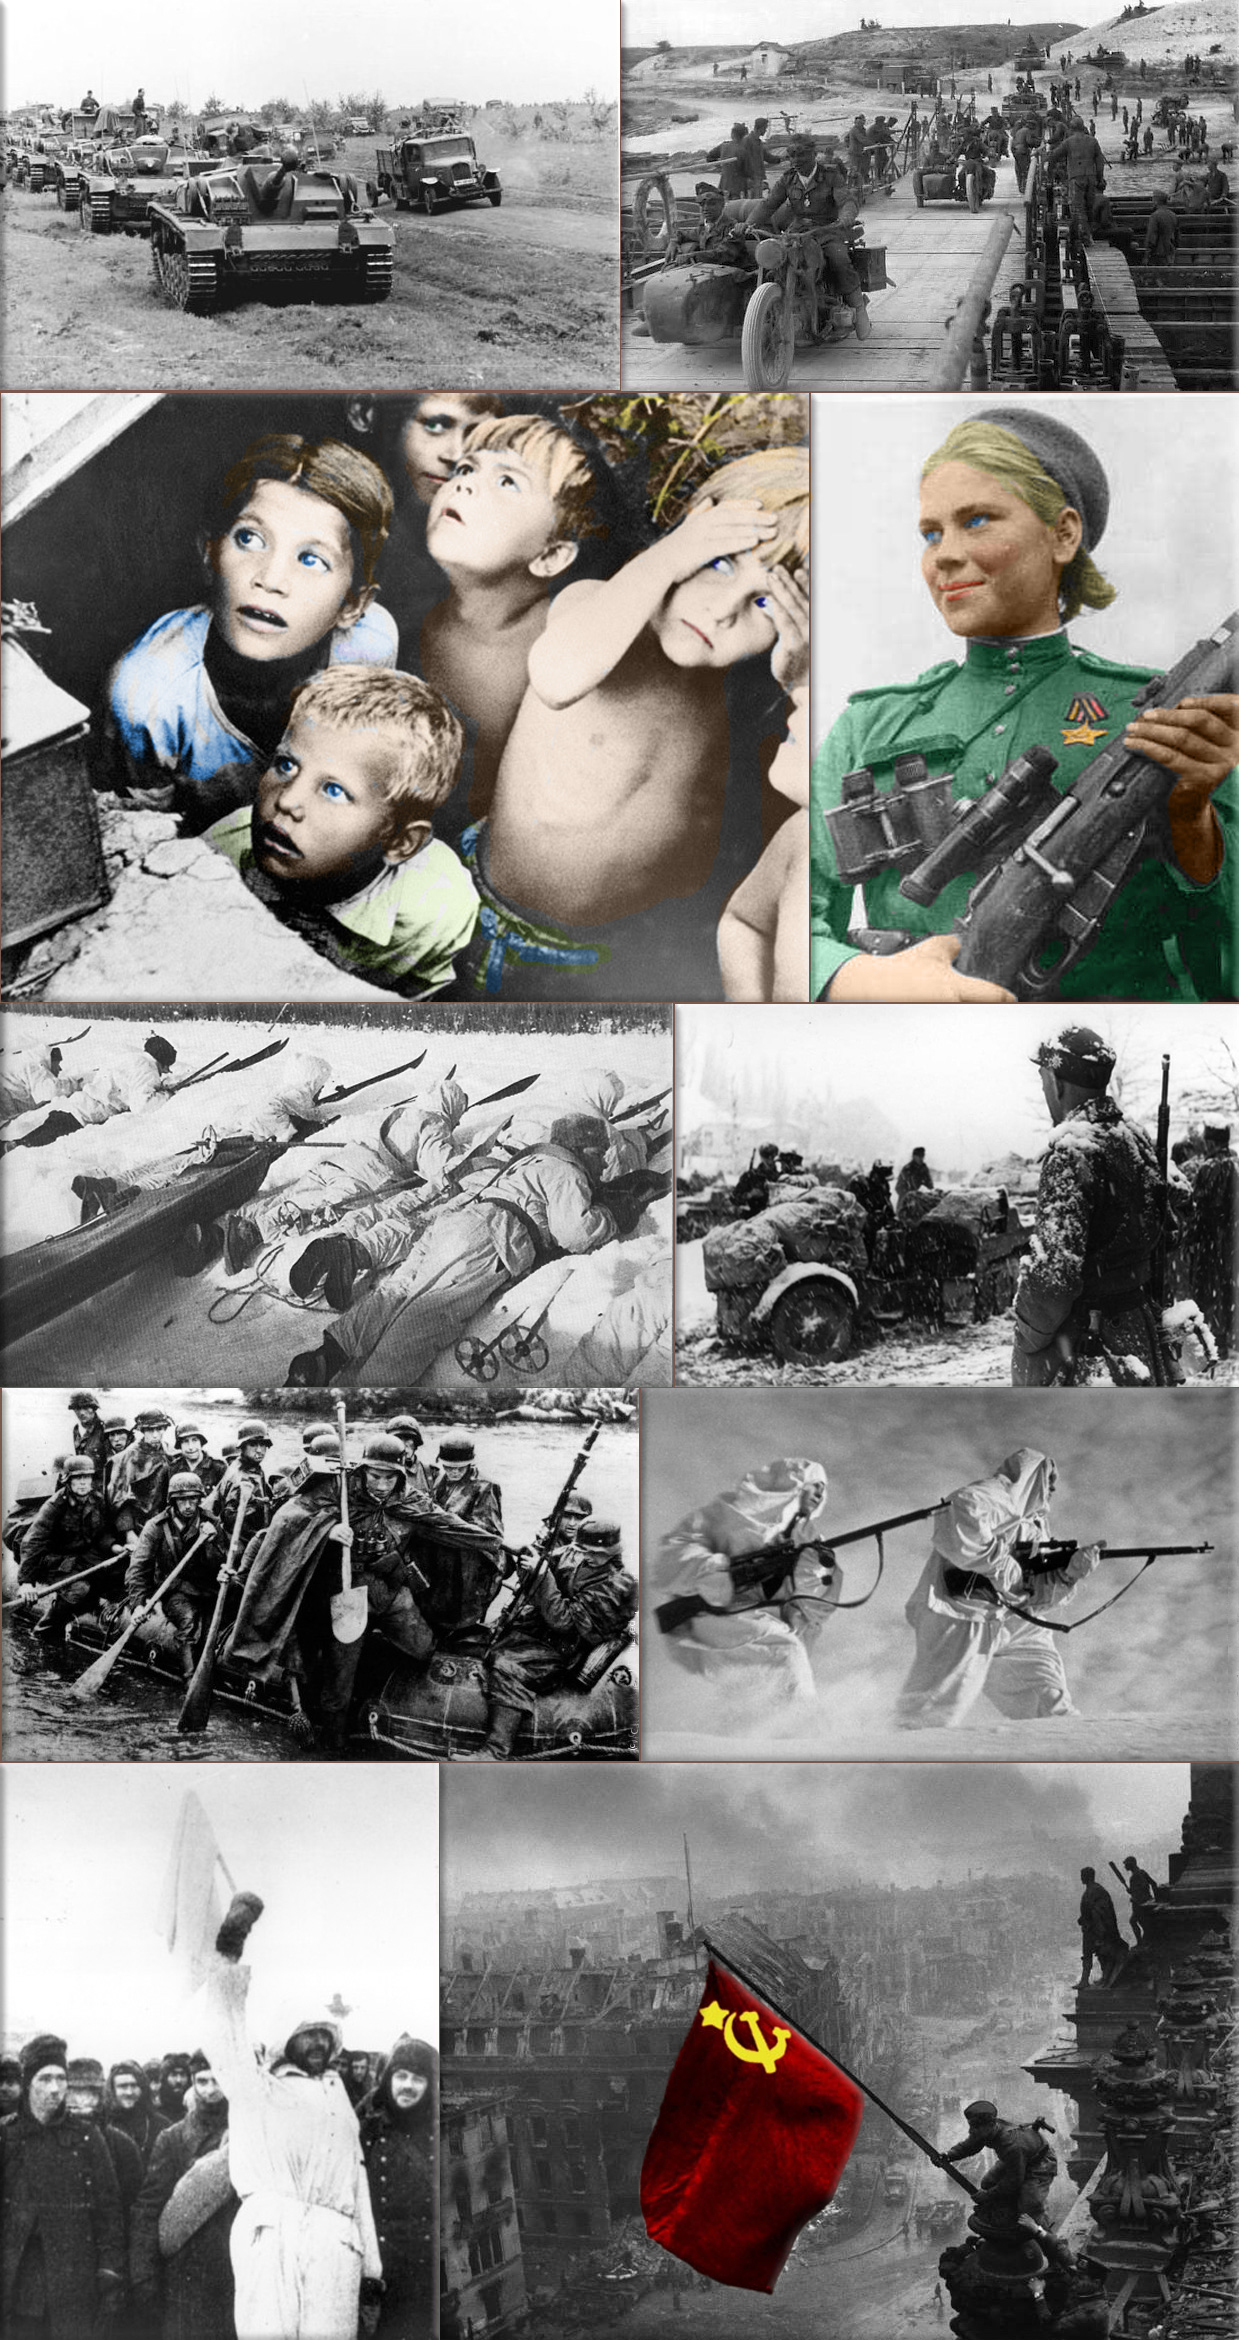 World War II: Eastern Front (World War II); was a theatre of World War II between the European Axis powers and co-belligerent Finland against the Soviet Union, Poland, and some other Allies which encompassed Northern, Southern and Eastern Europe from 22 June 1941 to 9 May 1945